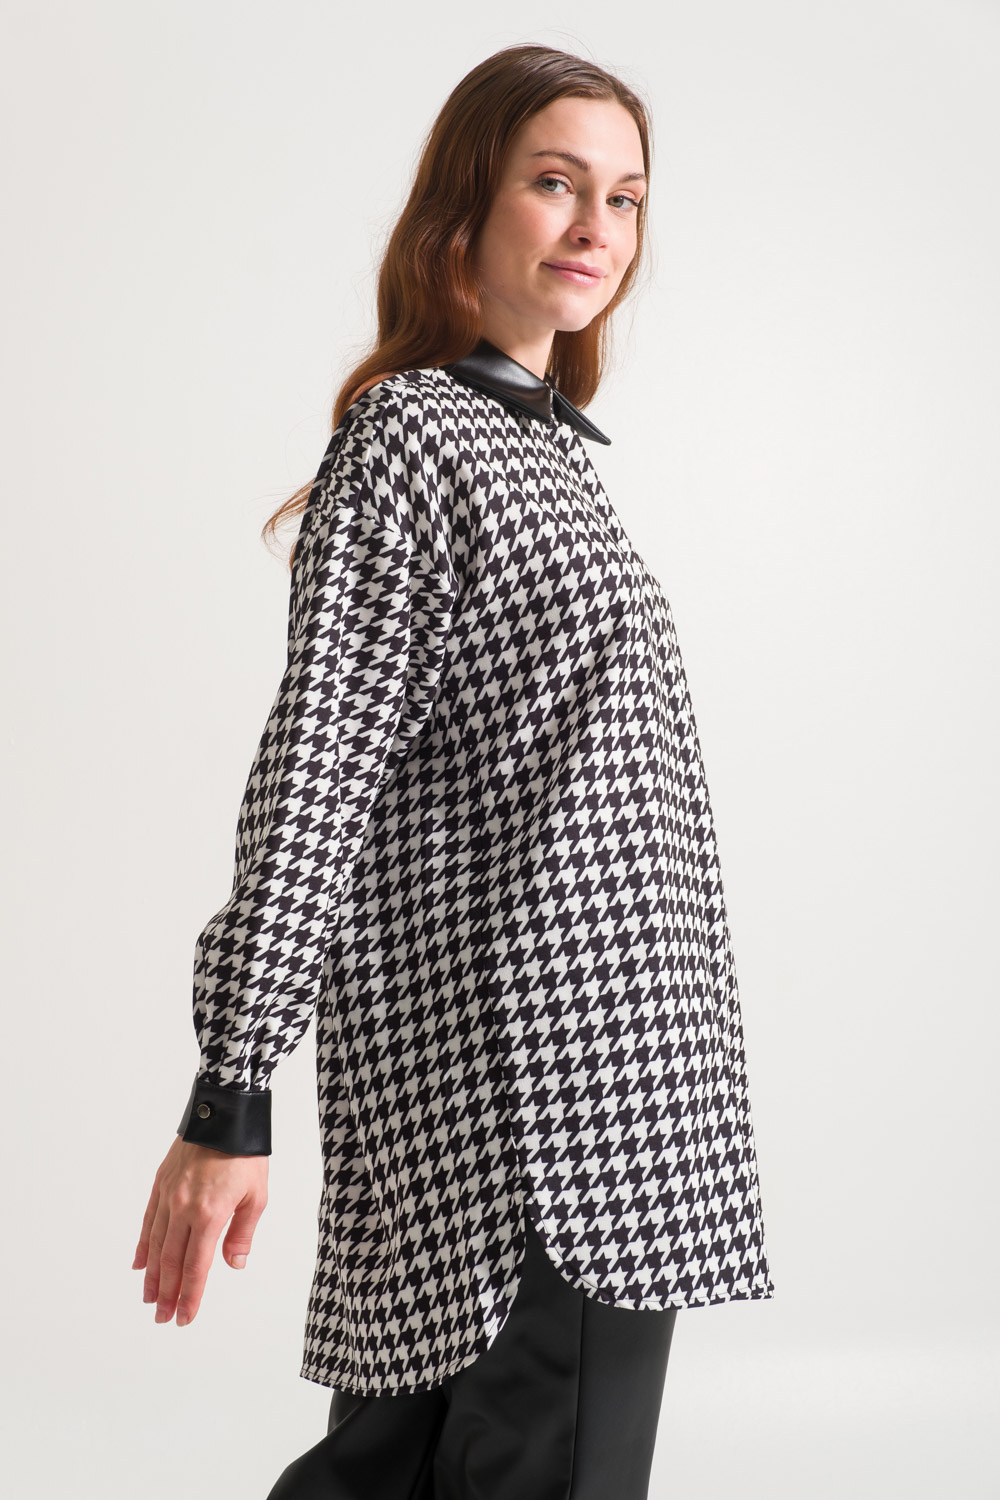 Goosefoot Patterned Black Tunic with Hidden Buttons